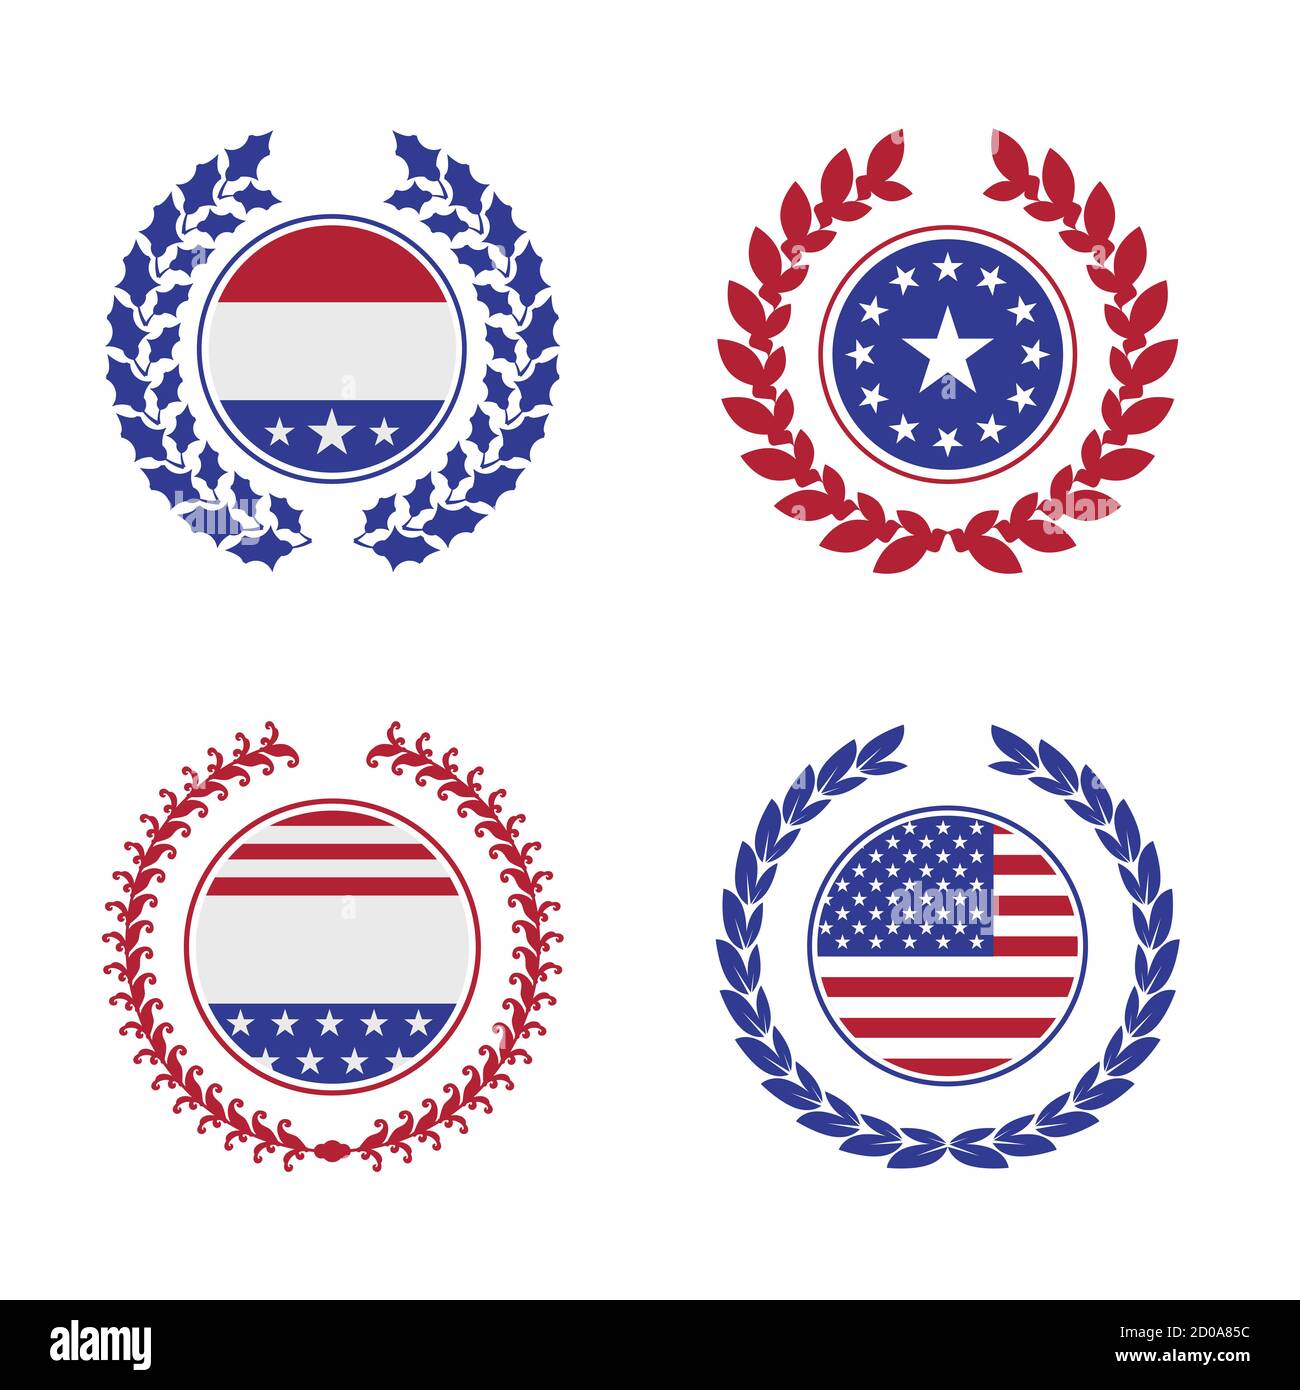 Laurel wreath with American symbols. 2020 United States presidential election. illustration. Stock Photo